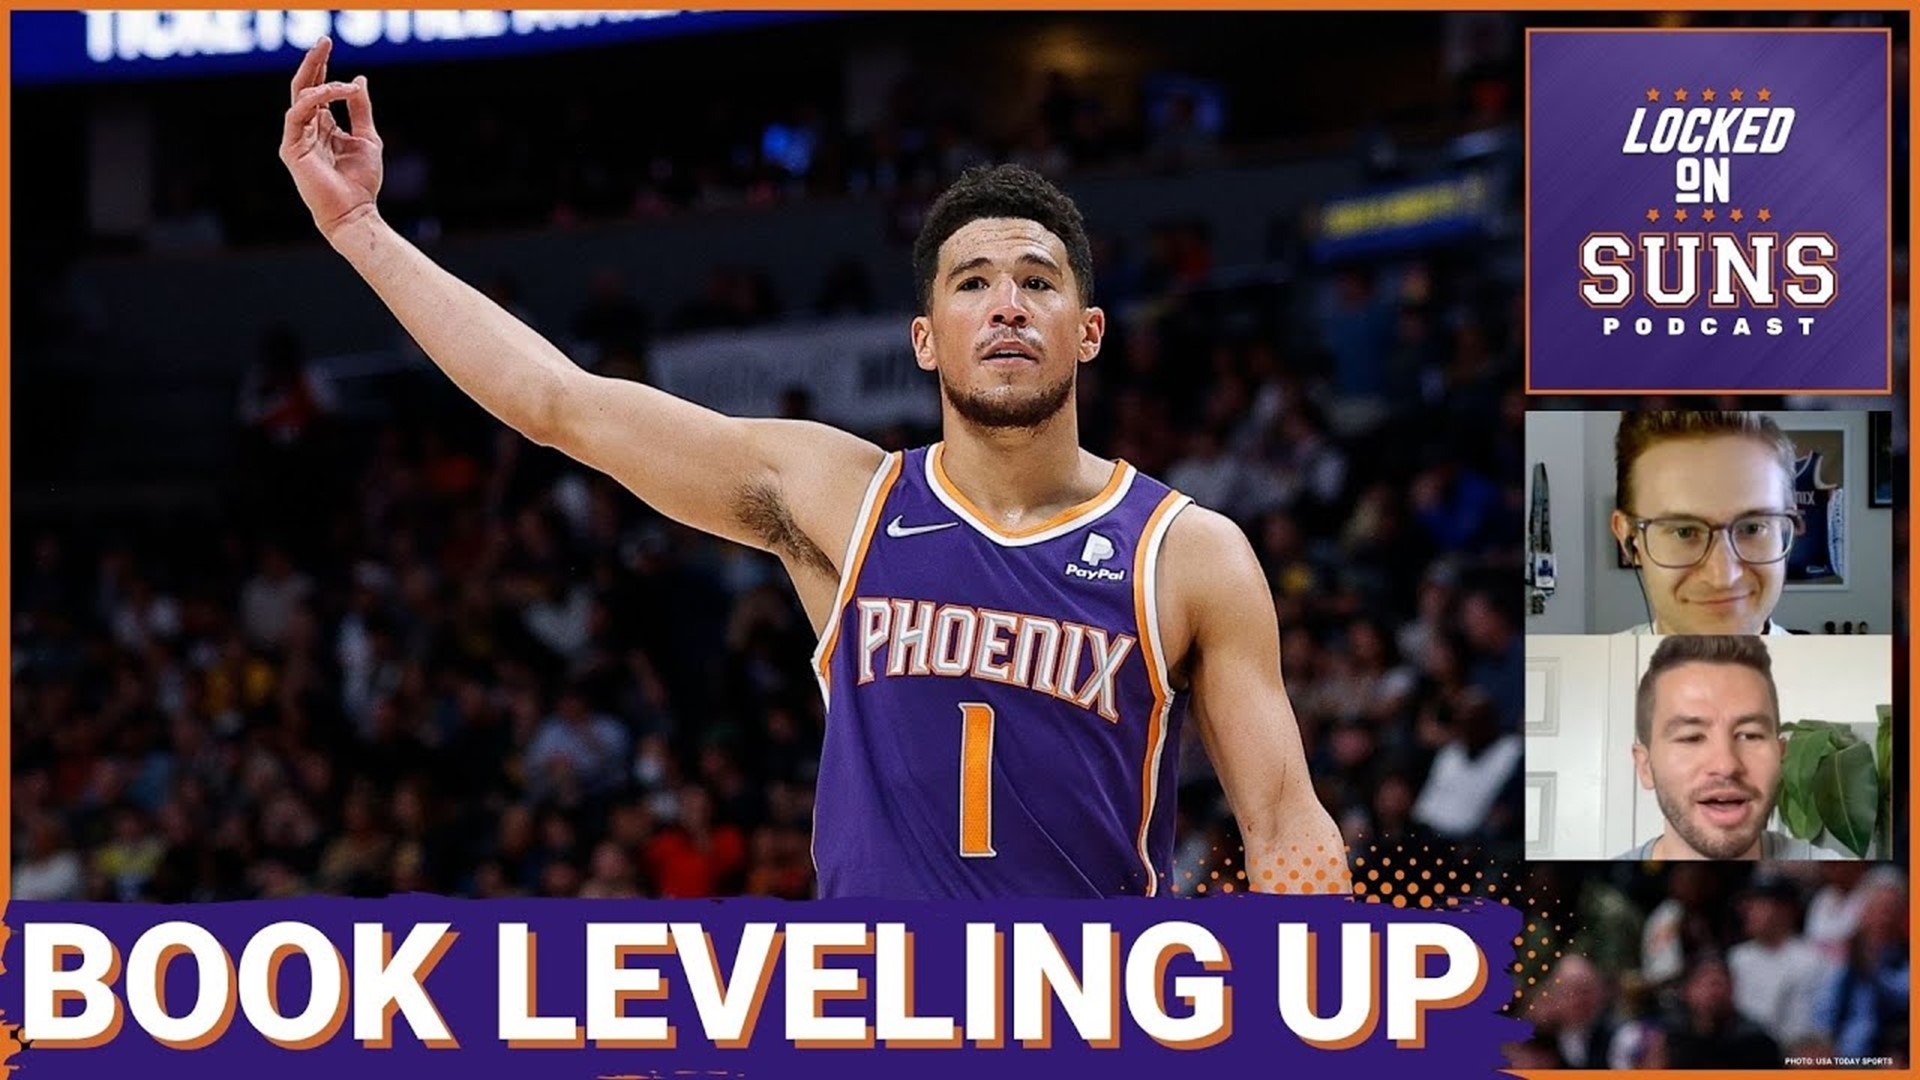 The Phoenix Suns likely need a top-five player to win the NBA championship, and Devin Booker can be that for them.